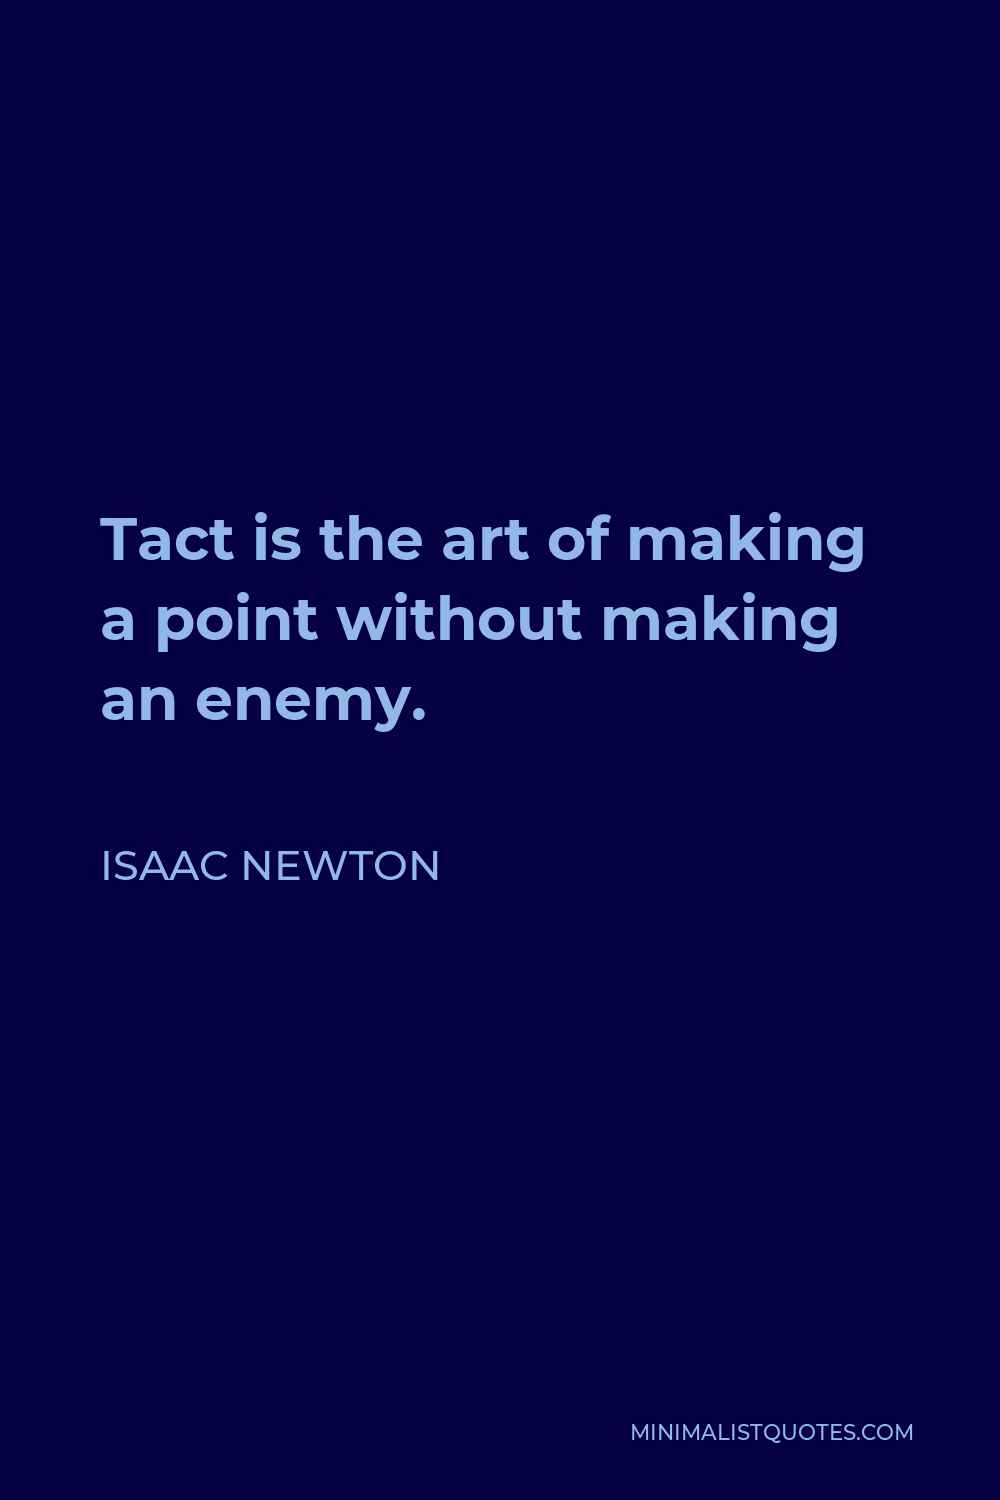 Isaac Newton Quote - Tact is the art of making a point without making an enemy.